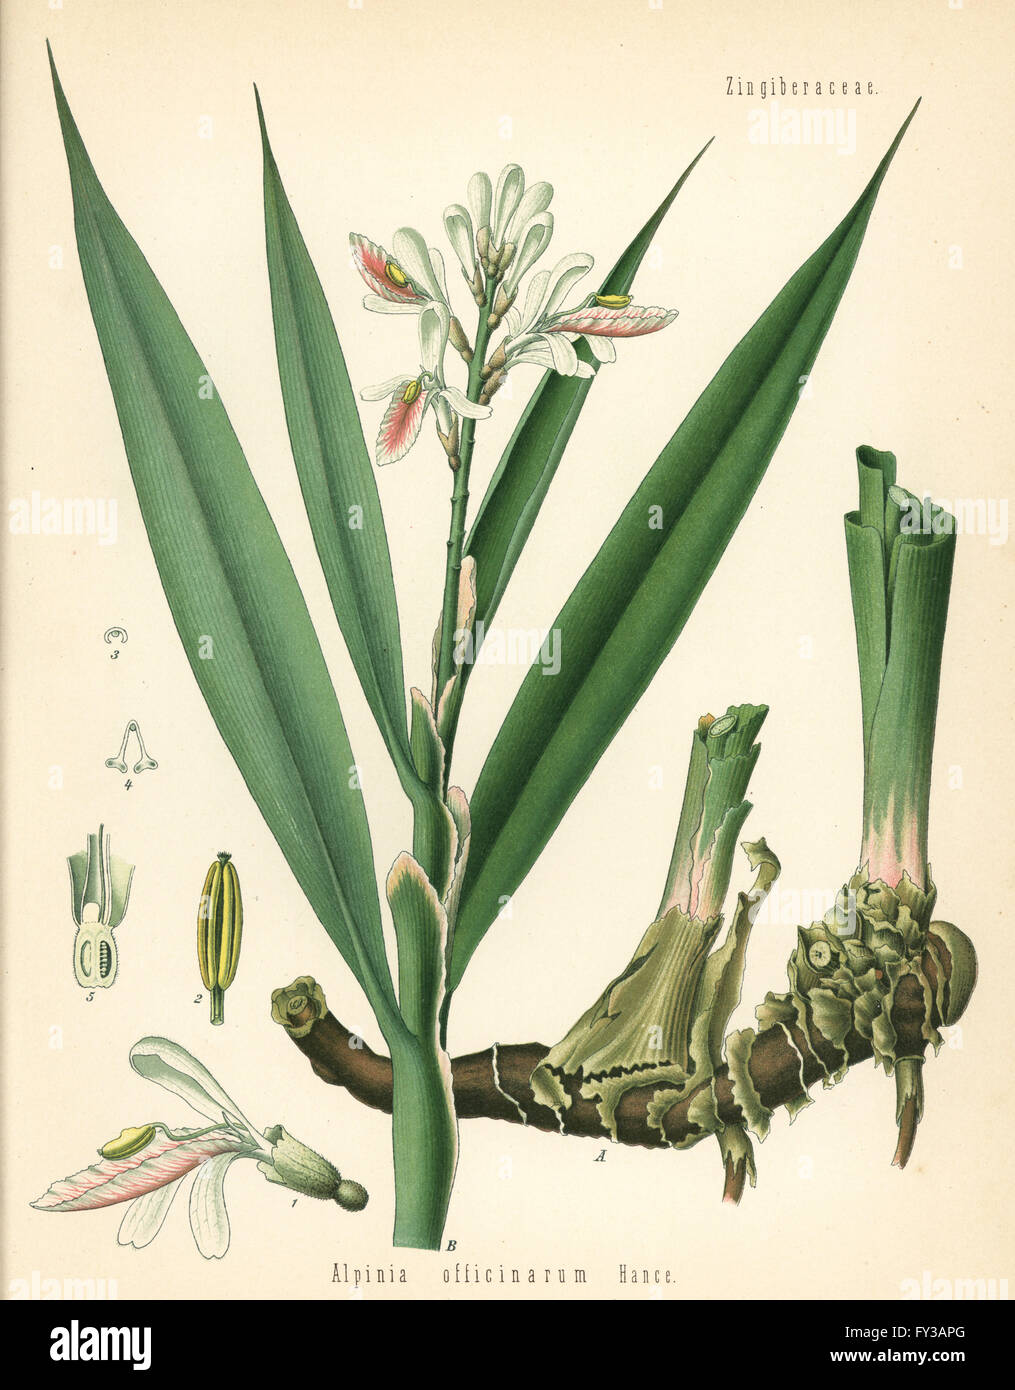 Lesser galangal, Alpinia officinarum. Chromolithograph after a botanical illustration from Hermann Adolph Koehler's Medicinal Plants, edited by Gustav Pabst, Koehler, Germany, 1887. Stock Photo